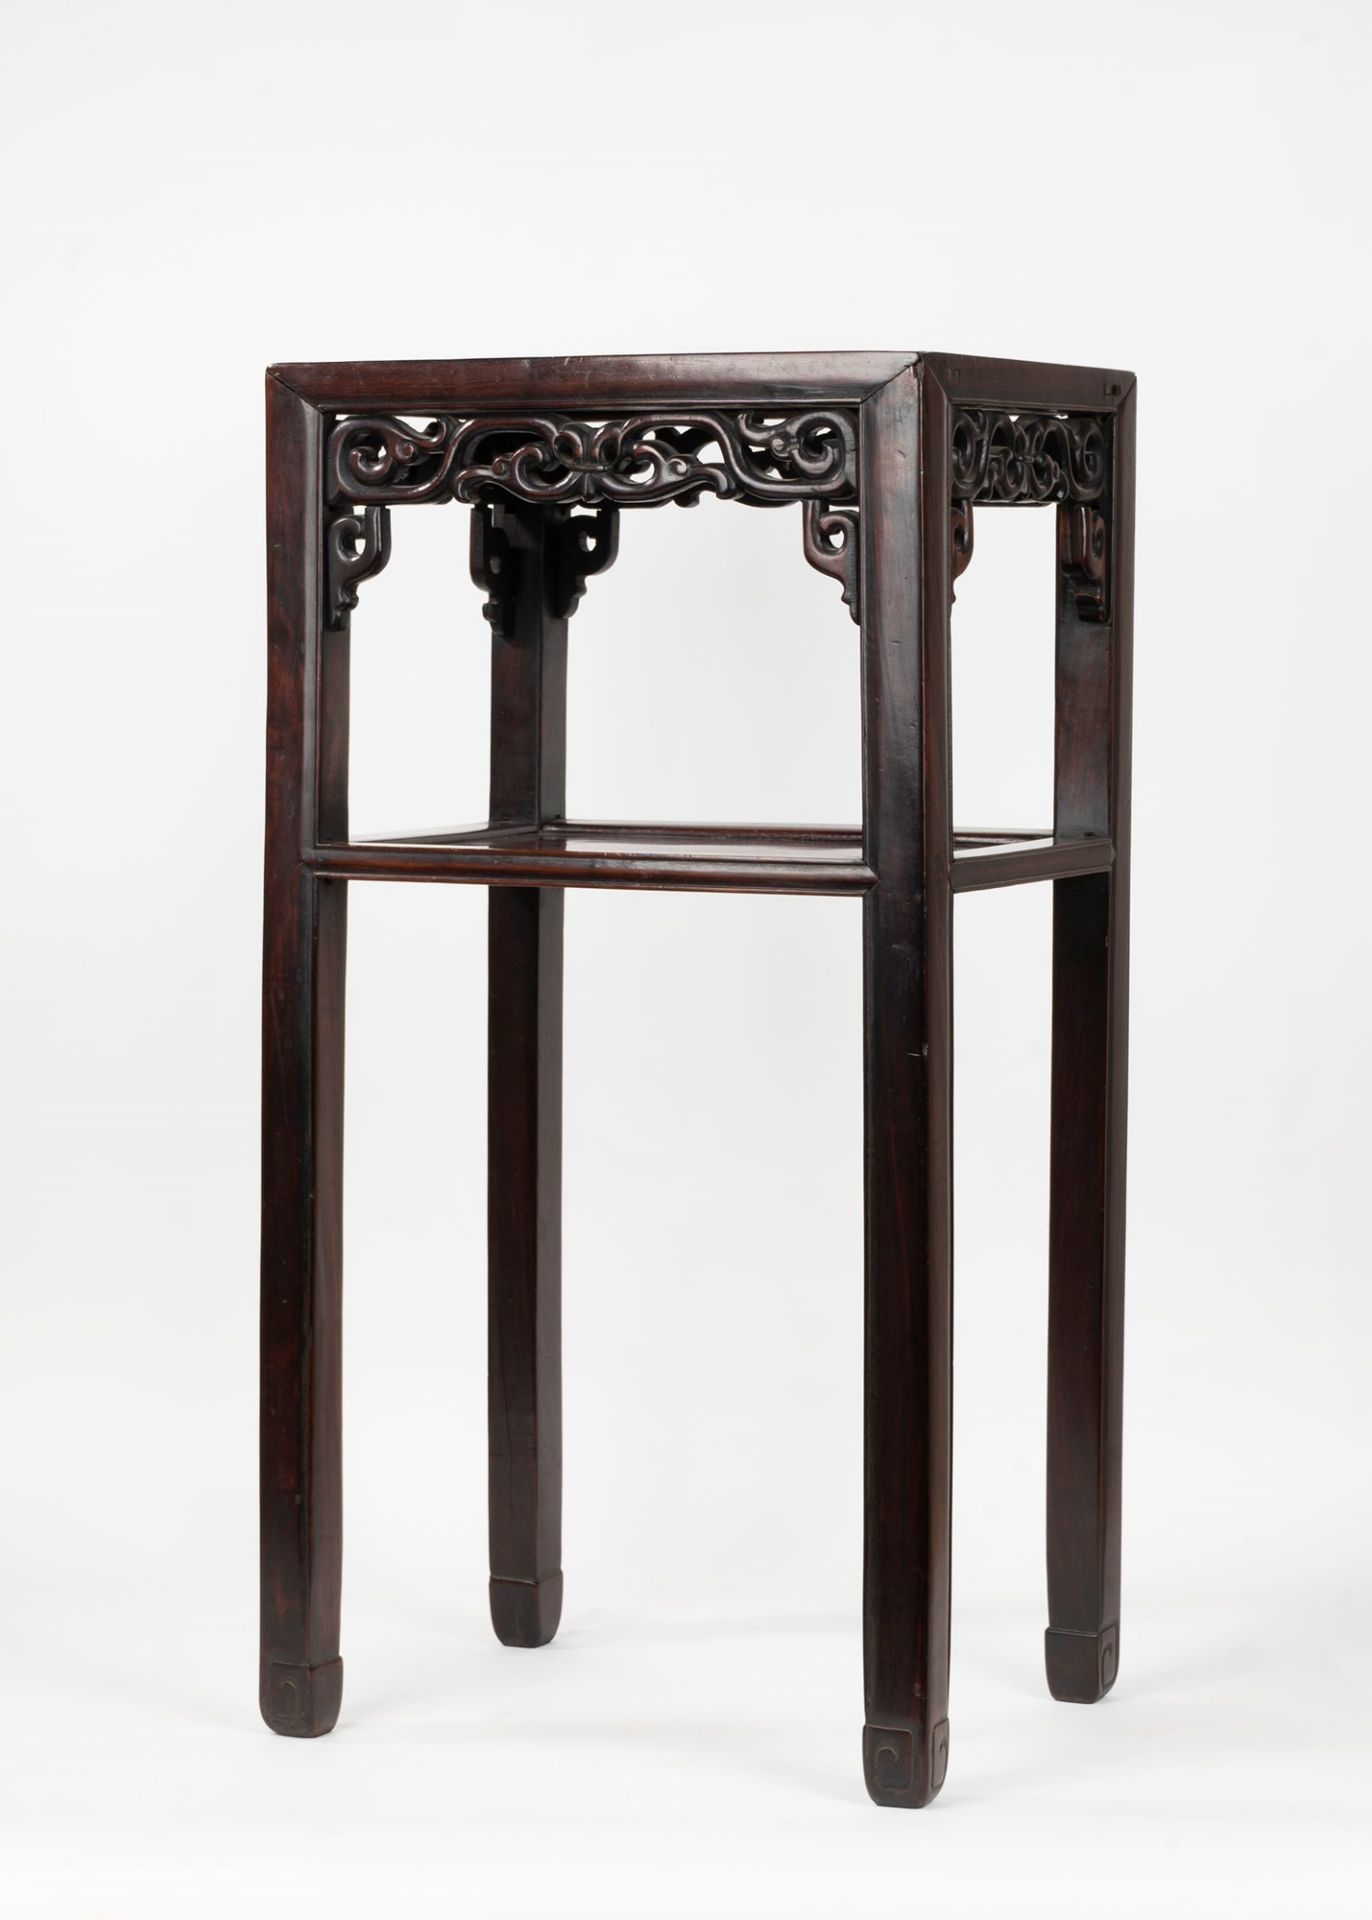 Pair of armchairs and a carved wooden table in oriental style, 20th century - Image 6 of 7